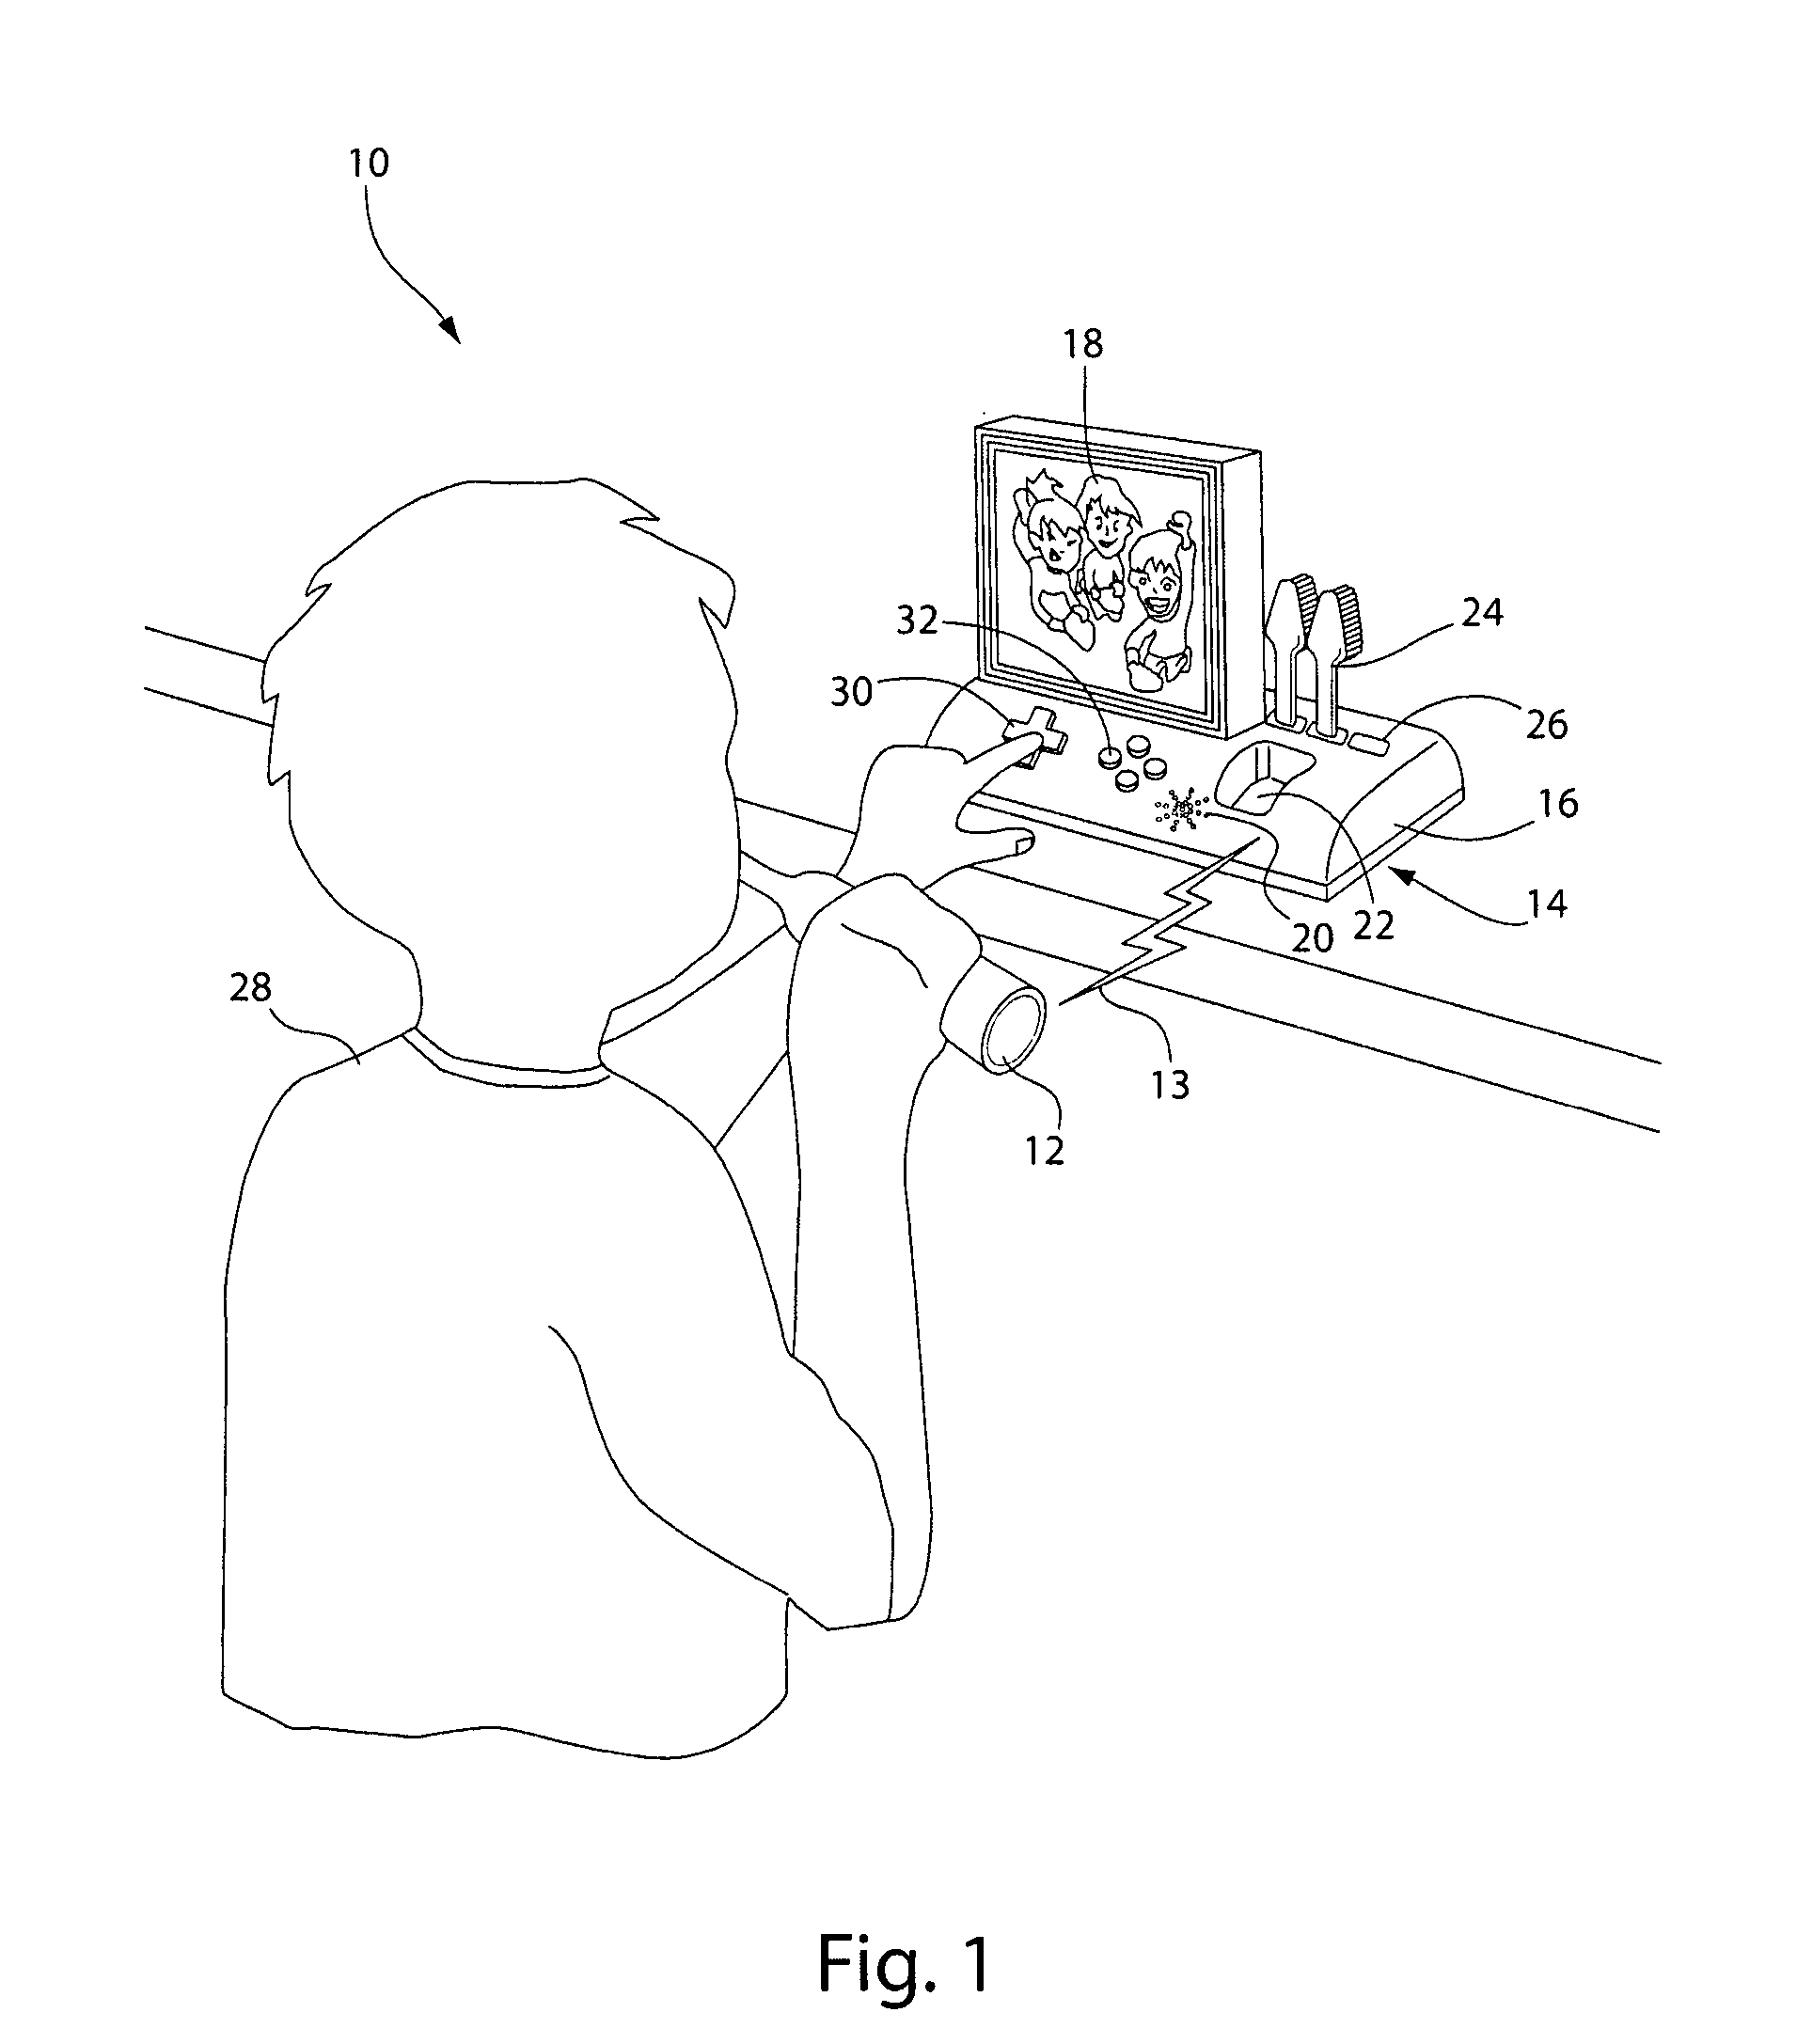 Oral care gaming system with electronic game